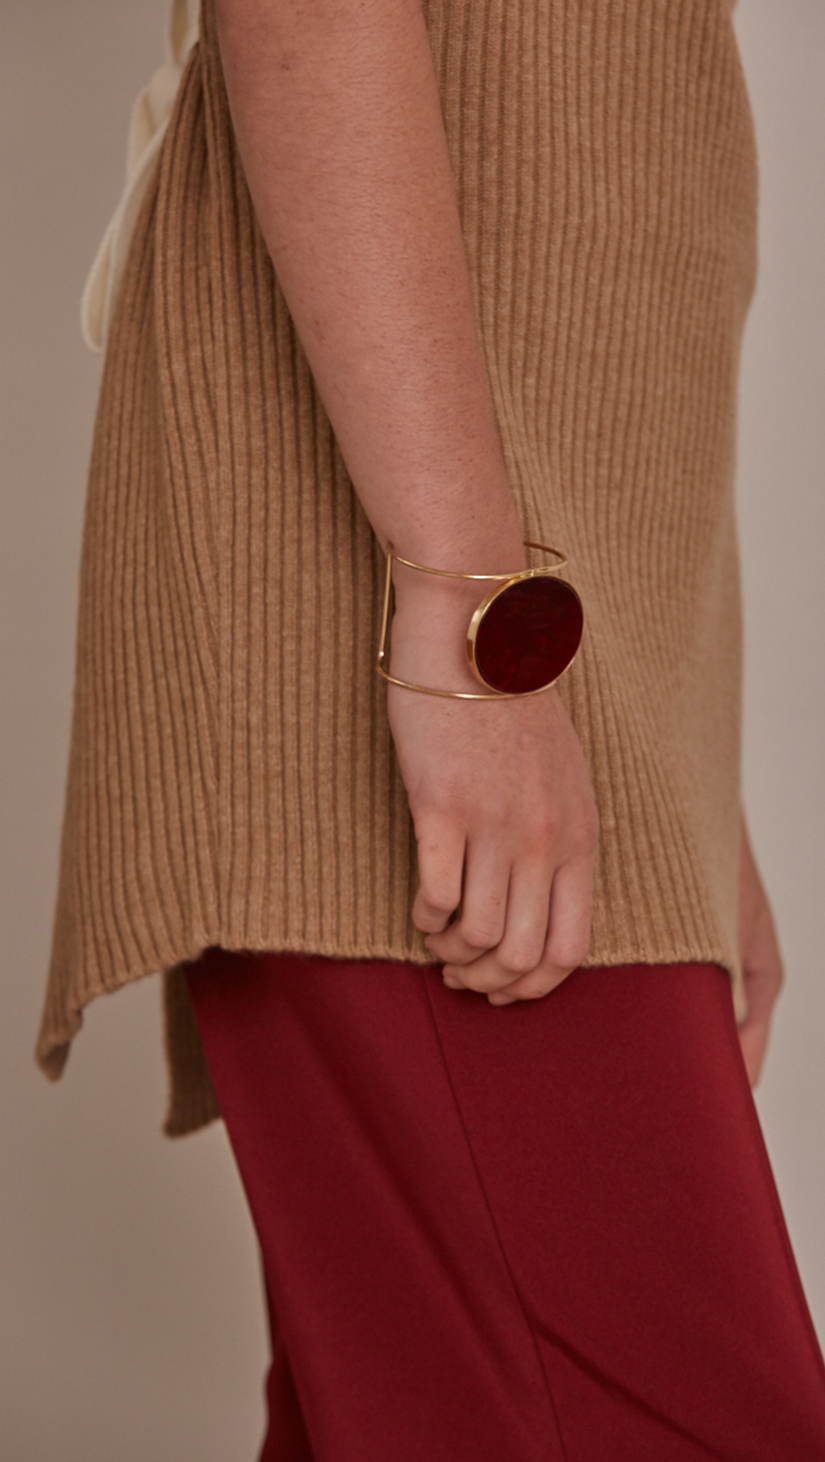 Claudé Bracelet, gold plating cuff with free moving burgundy marble discus circle.